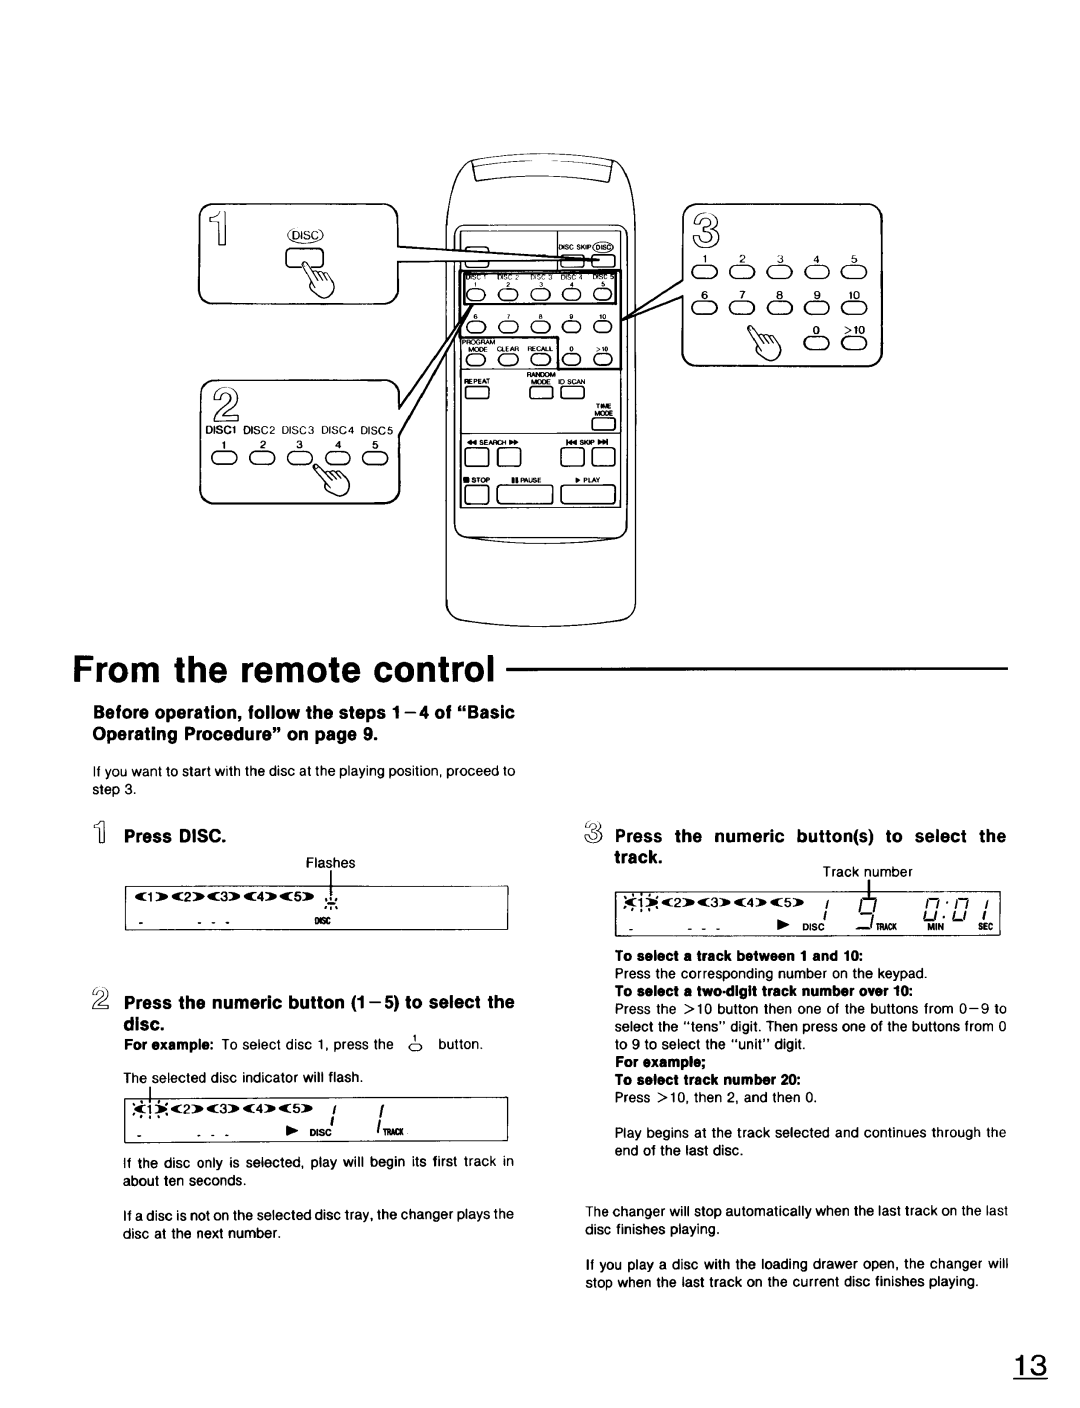 Technics SL-PD947 From the remote control, Before operation, follow the steps 1-4of Basic, Operating Procedure on page 